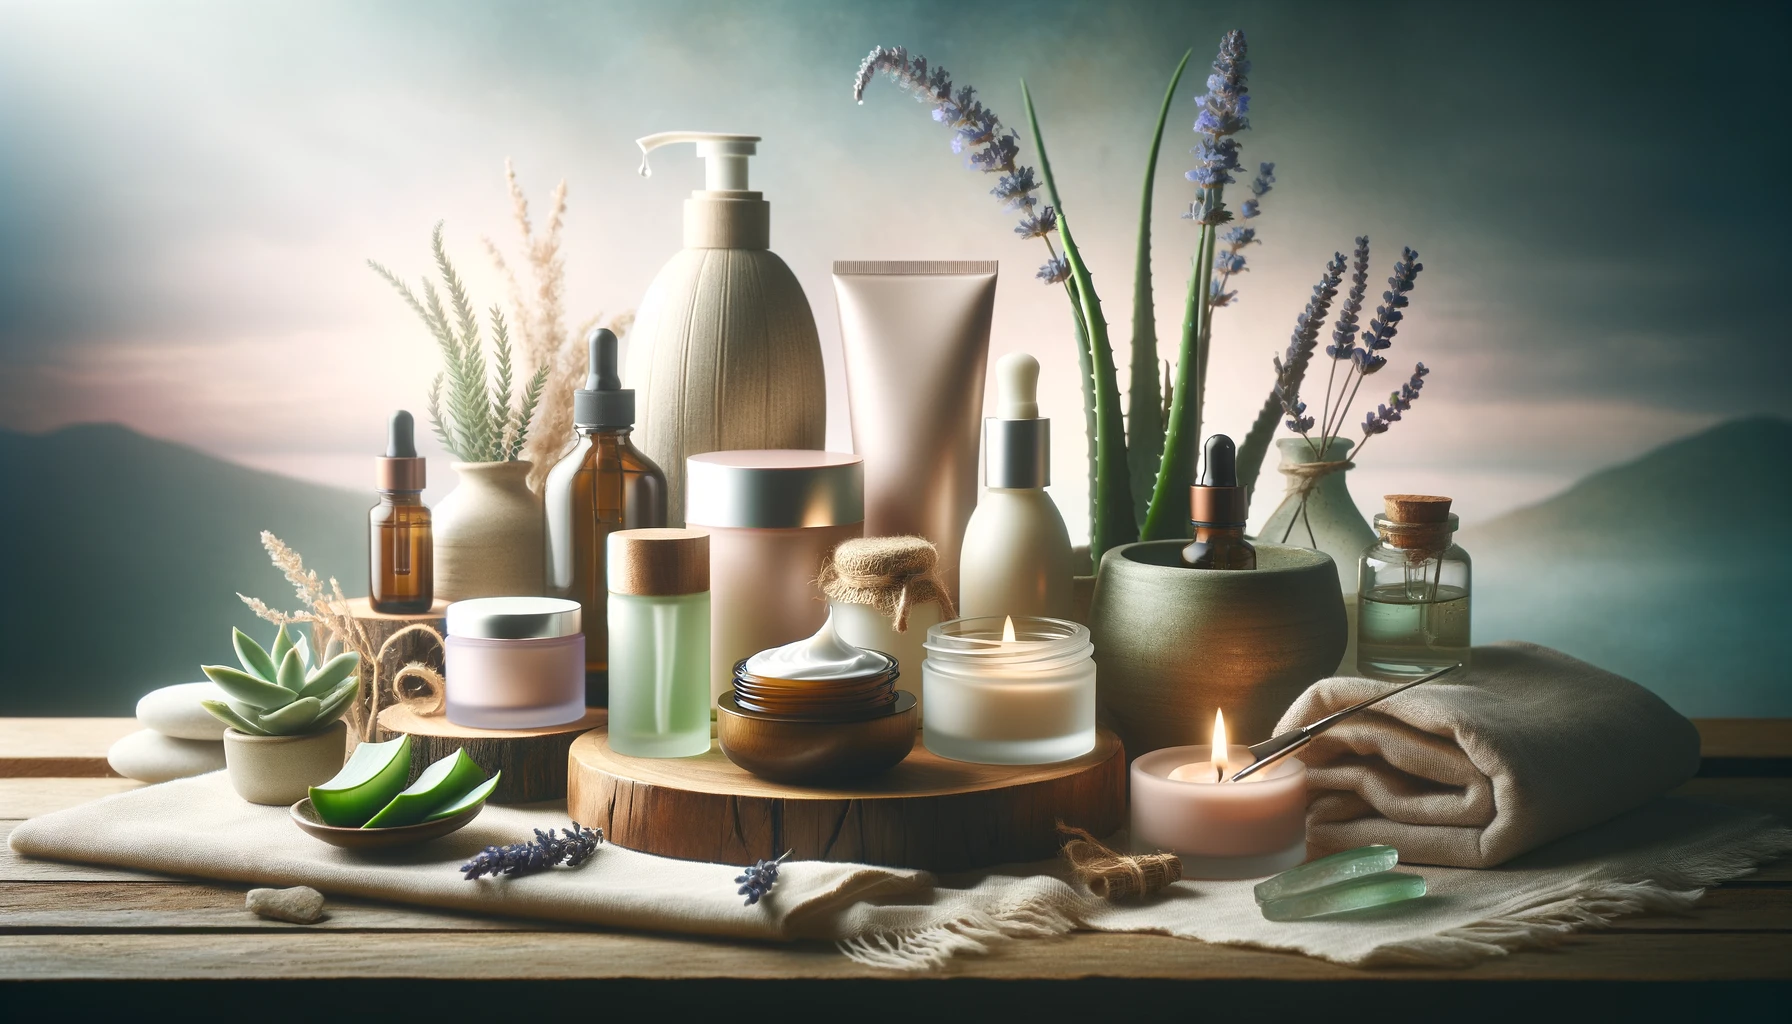 Assortment of skincare products and natural ingredients on a wooden shelf, representing Healthy Life - New Start's focus on skincare.